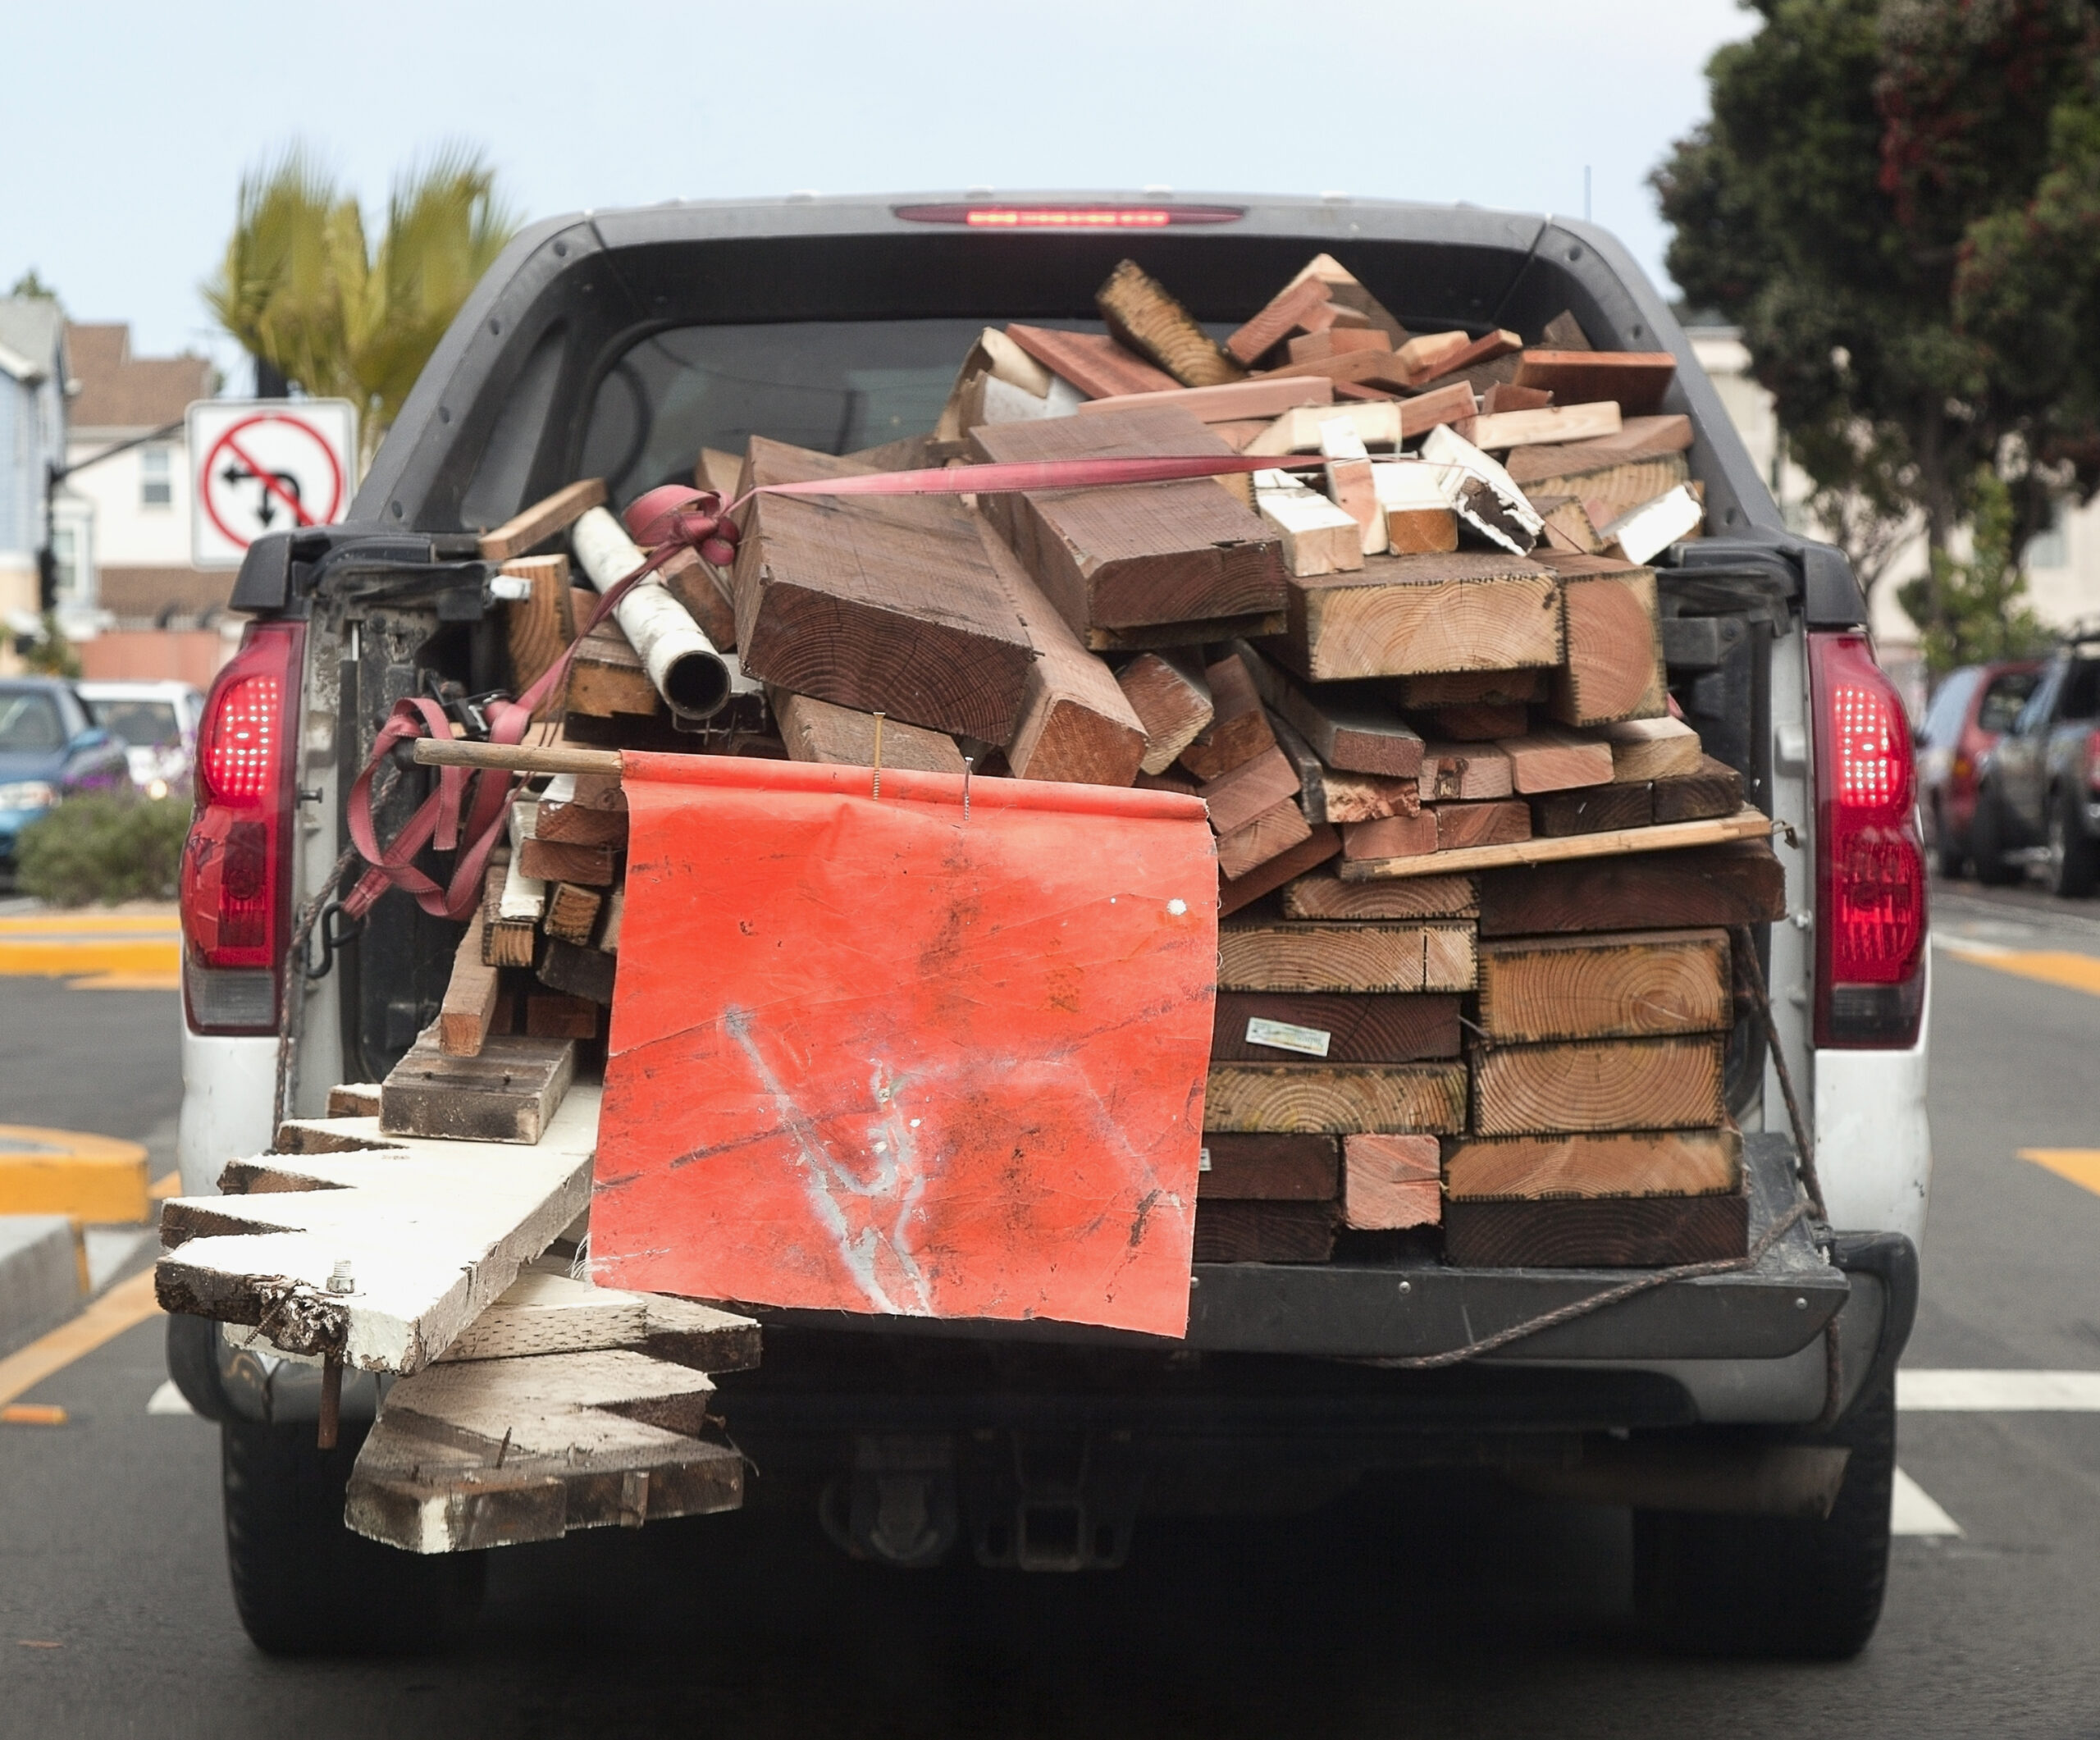 A truck packed with potential debris.